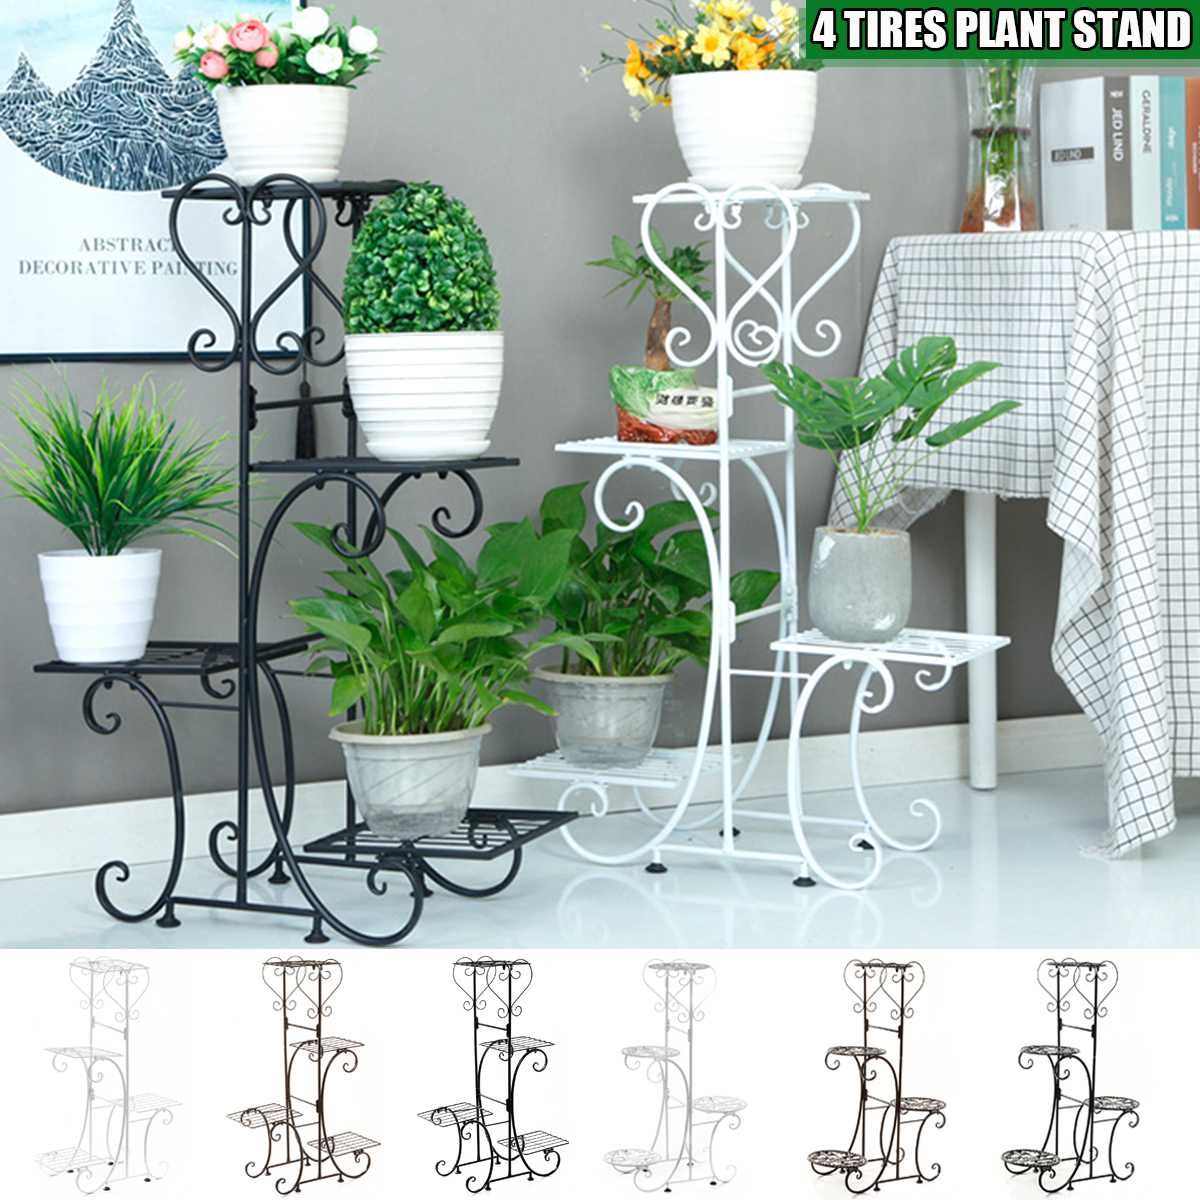 4 Tier Metal Plant Stand Holder Flower Pot Holder Shelves Display Rack Home  Decor Garden Balcony Flower Storage Rack – Plant Shelves – Aliexpress With Four Tier Metal Plant Stands (View 10 of 15)